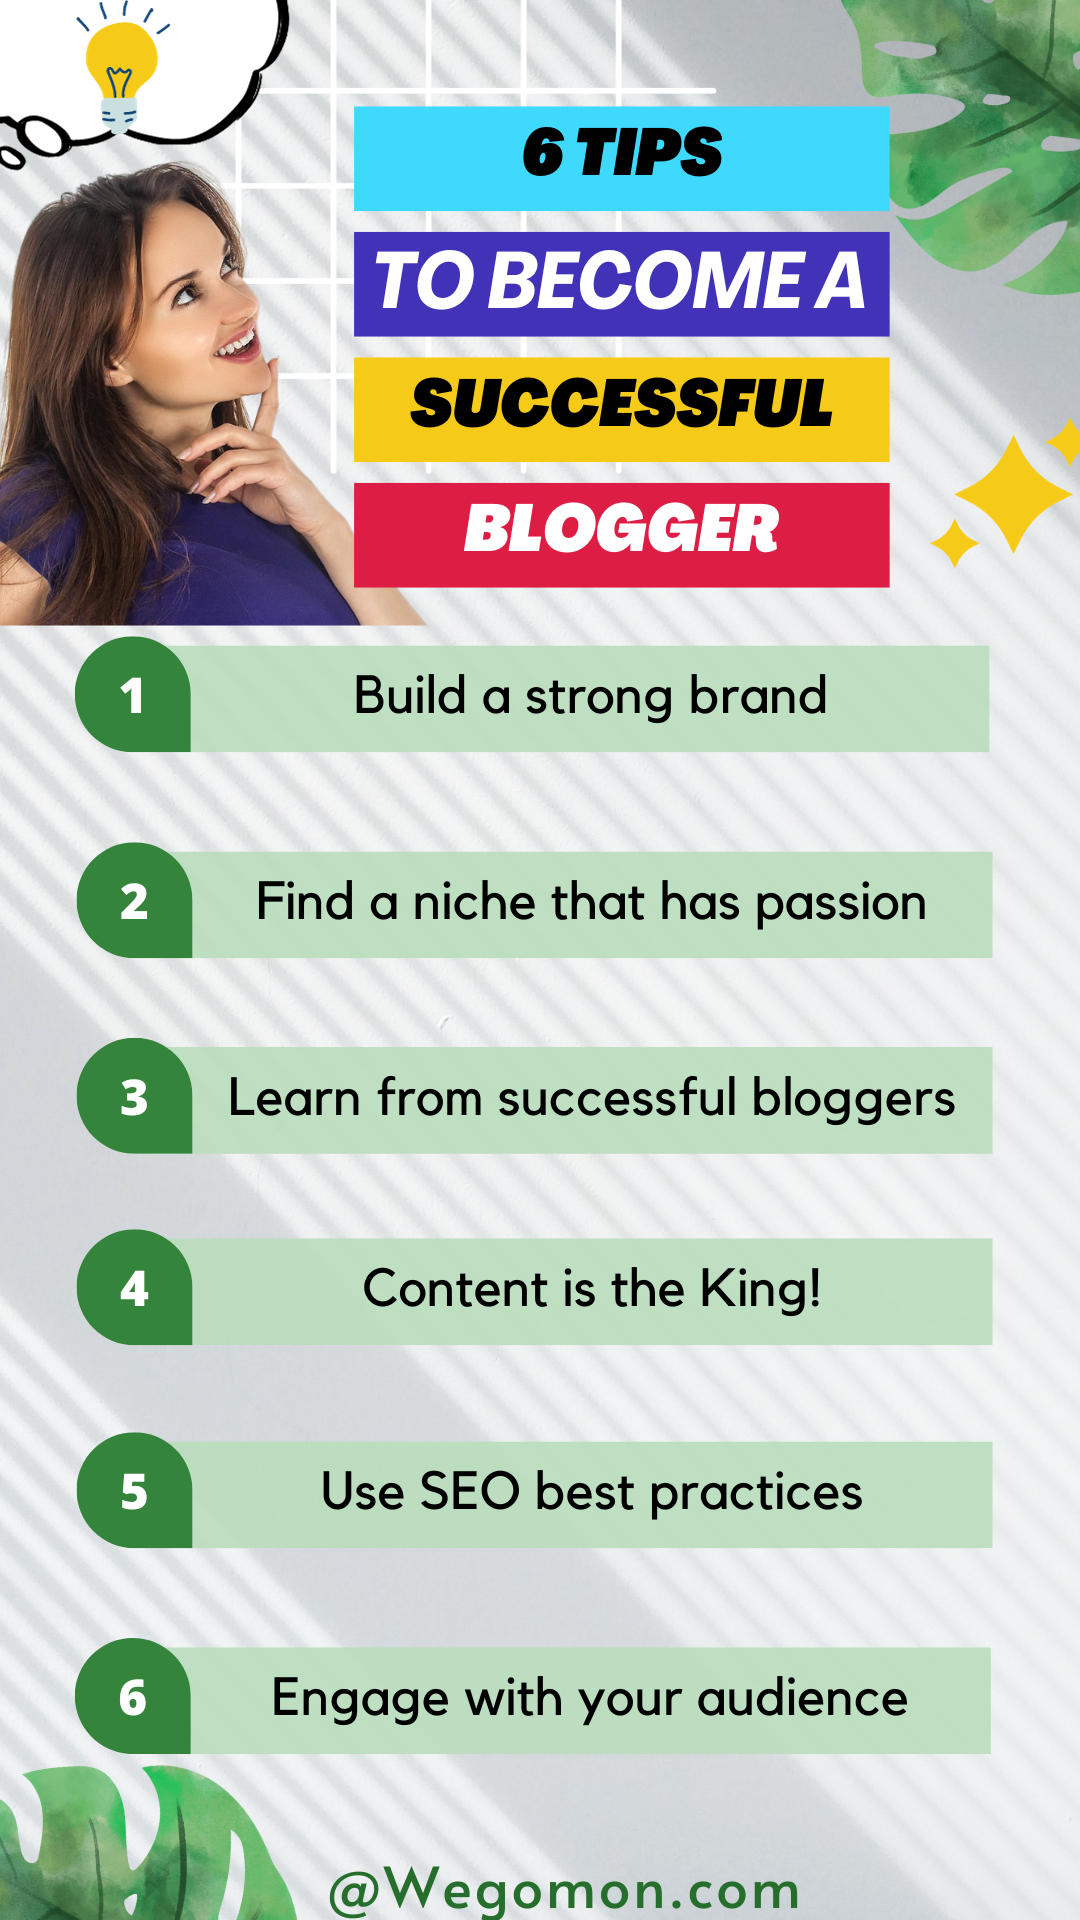 Top 6 tips to become a successful blogger